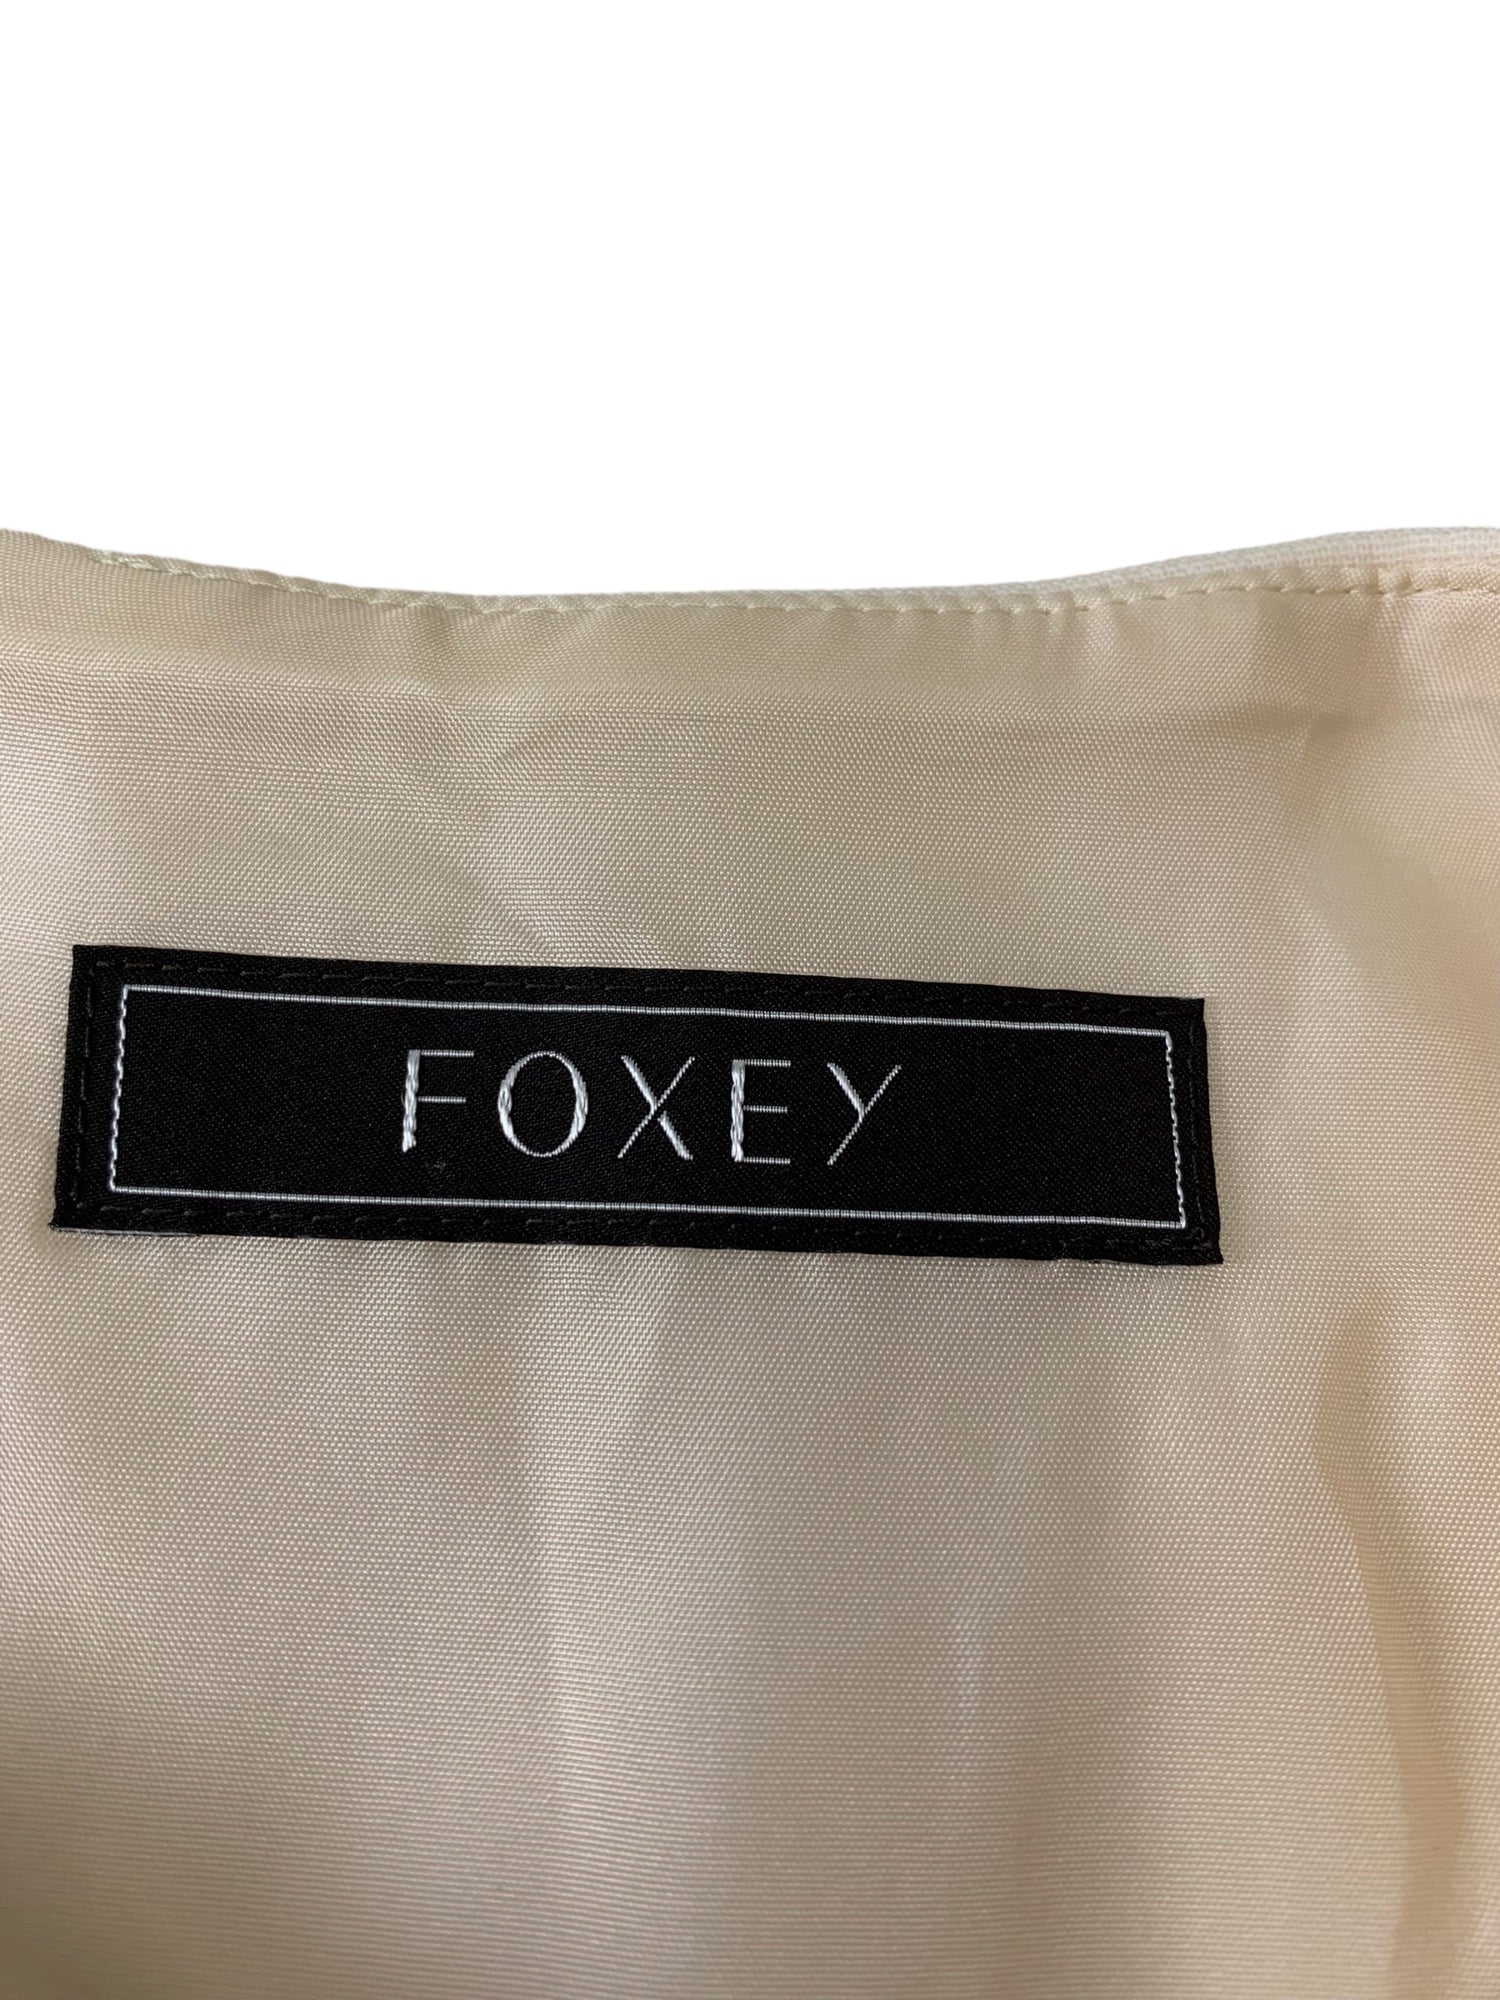 FOXEY CAMILLE フォクシー ワンピース 最新 - ワンピース